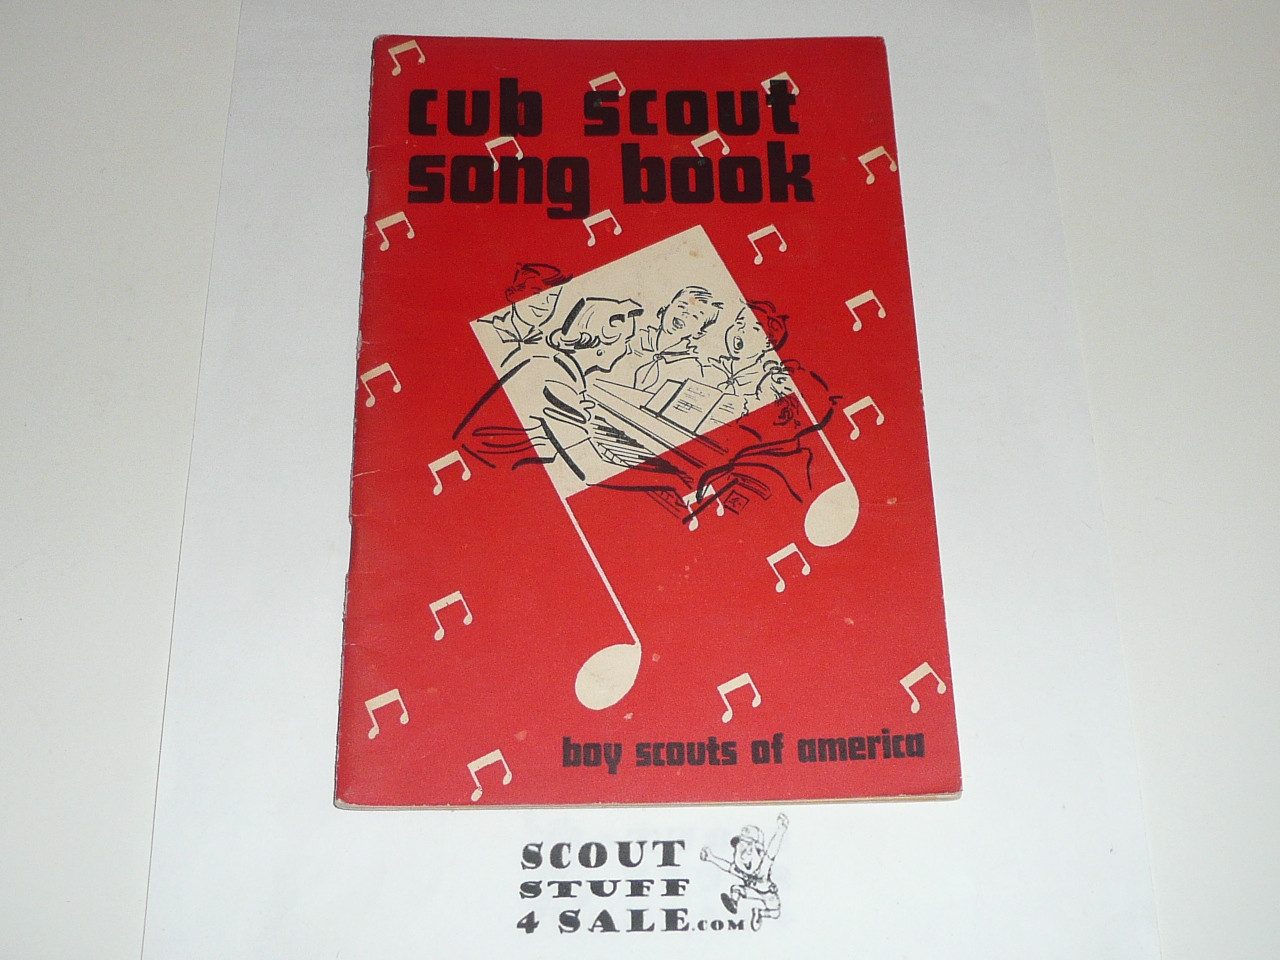 1956 Cub Scout Songbook, 9-56 Printing